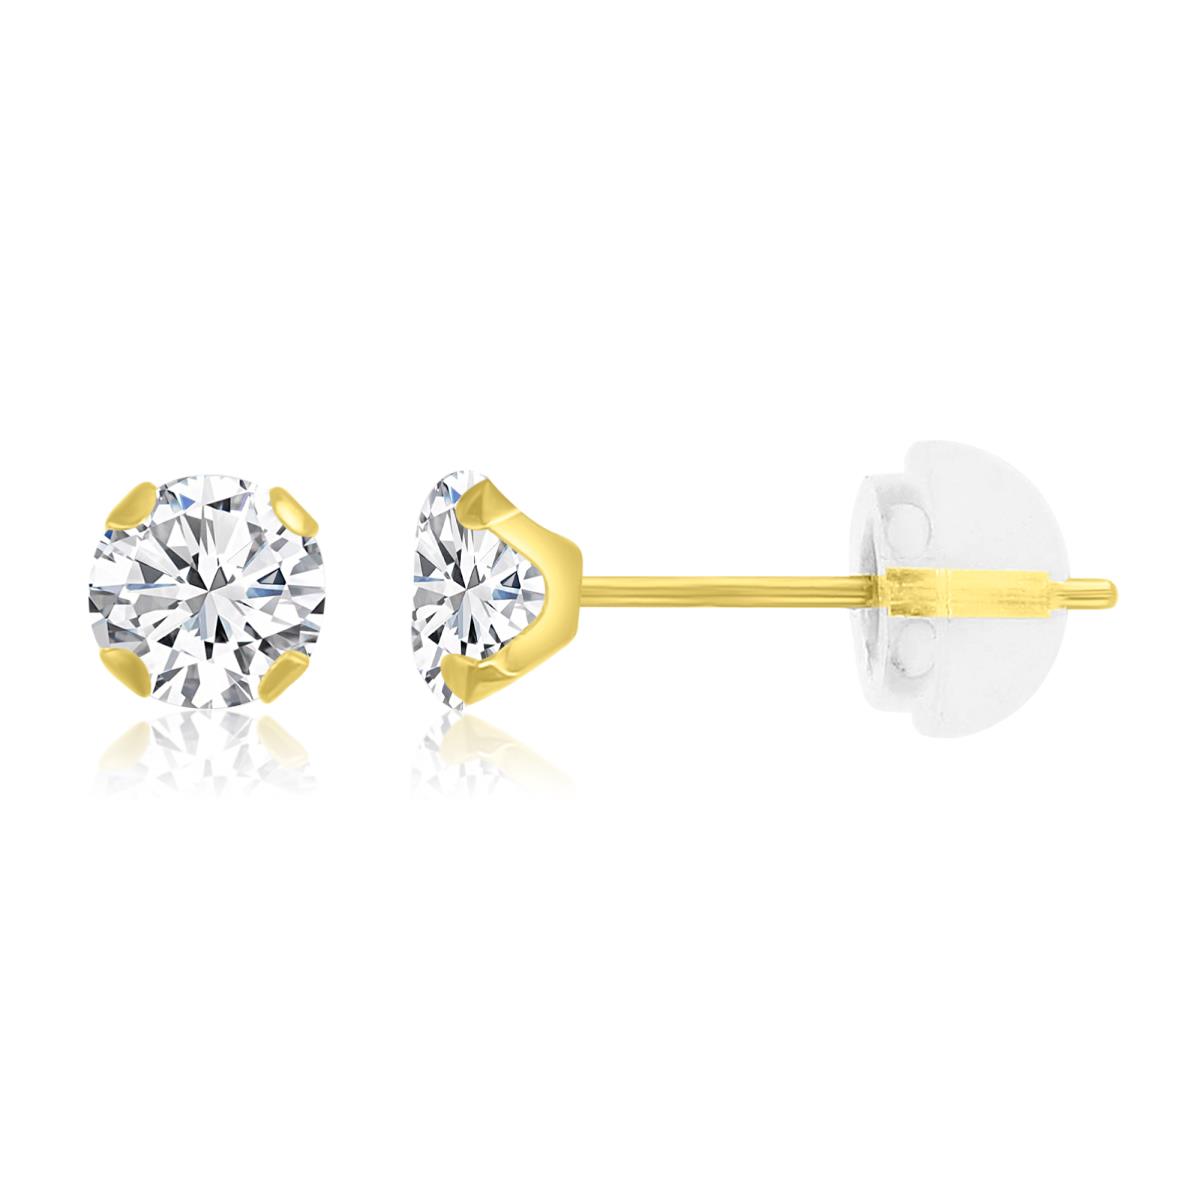 14K Yellow Gold 4mm Martini Round Cut Solitaire Stud Earring